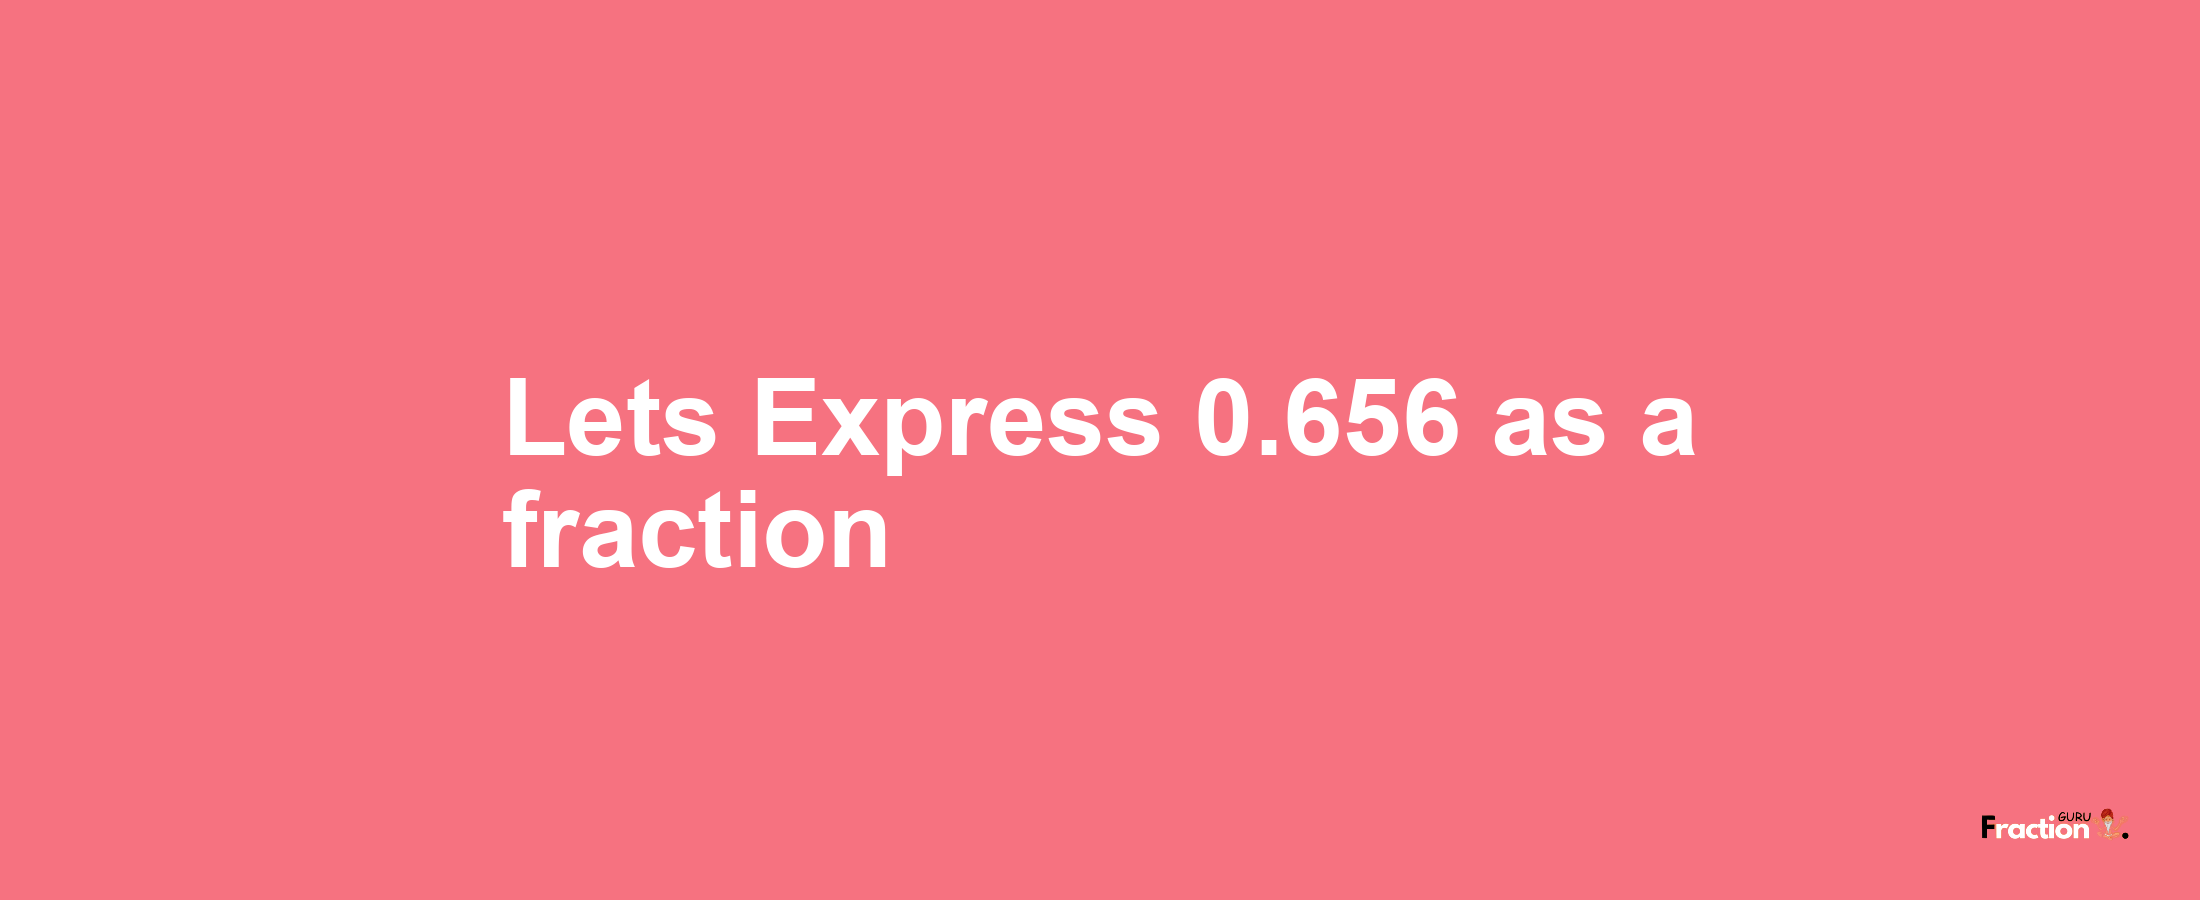 Lets Express 0.656 as afraction